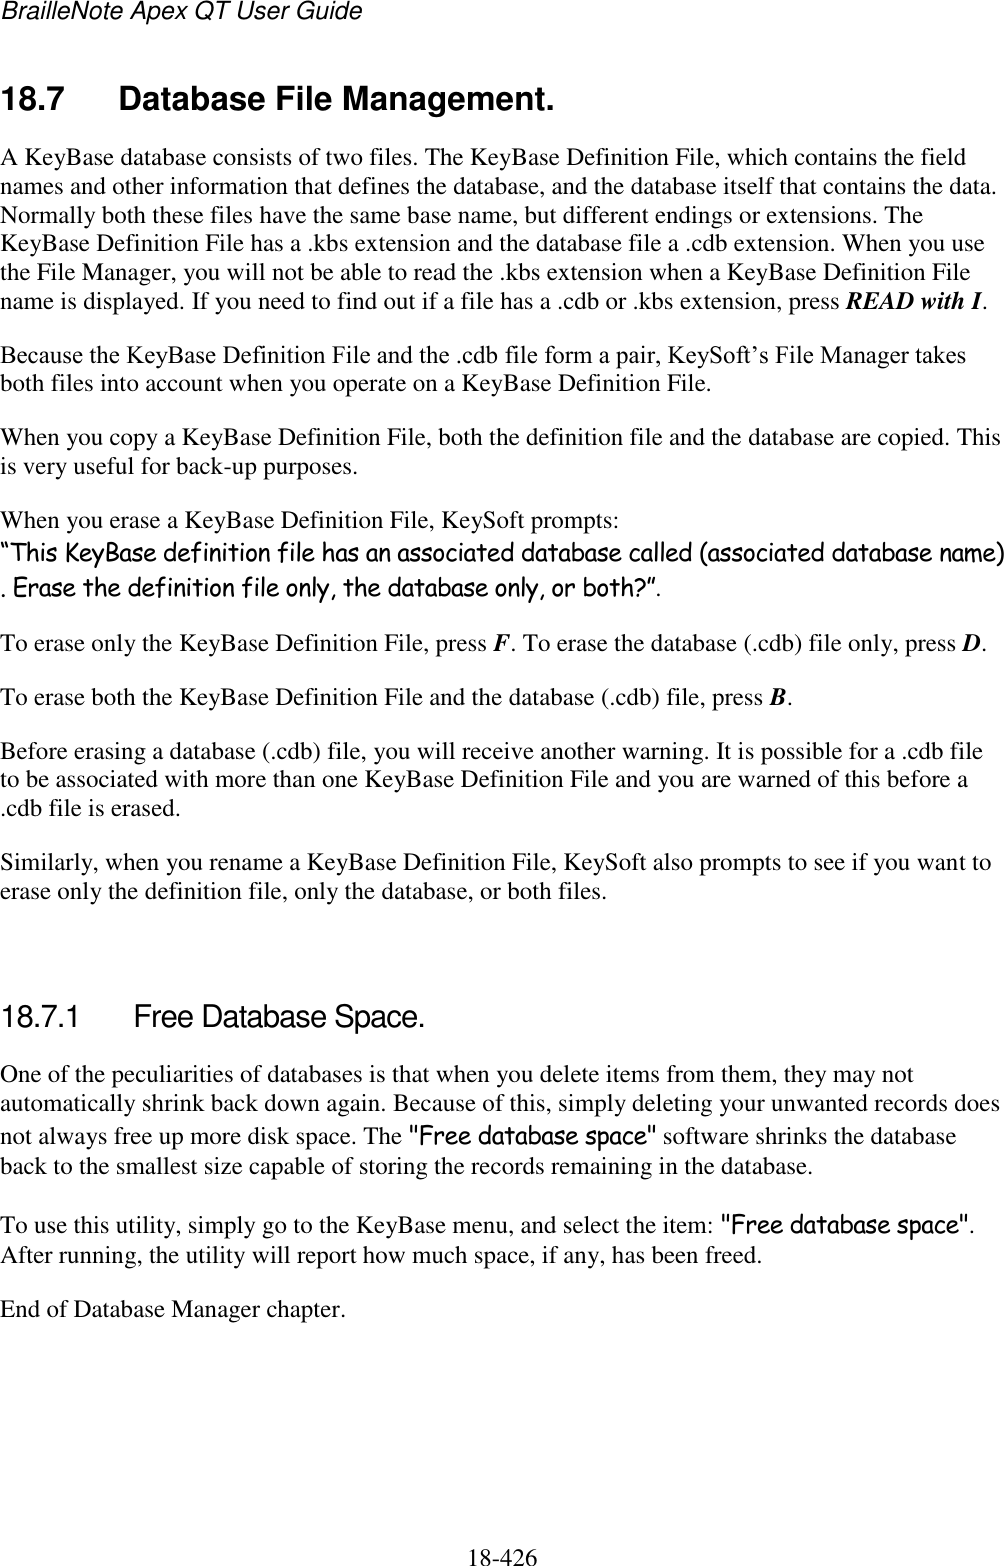 BrailleNote Apex QT User Guide  18-426   18.7  Database File Management. A KeyBase database consists of two files. The KeyBase Definition File, which contains the field names and other information that defines the database, and the database itself that contains the data. Normally both these files have the same base name, but different endings or extensions. The KeyBase Definition File has a .kbs extension and the database file a .cdb extension. When you use the File Manager, you will not be able to read the .kbs extension when a KeyBase Definition File name is displayed. If you need to find out if a file has a .cdb or .kbs extension, press READ with I.  Because the KeyBase Definition File and the .cdb file form a pair, KeySoft‟s File Manager takes both files into account when you operate on a KeyBase Definition File. When you copy a KeyBase Definition File, both the definition file and the database are copied. This is very useful for back-up purposes. When you erase a KeyBase Definition File, KeySoft prompts: “This KeyBase definition file has an associated database called (associated database name). Erase the definition file only, the database only, or both?”.  To erase only the KeyBase Definition File, press F. To erase the database (.cdb) file only, press D.  To erase both the KeyBase Definition File and the database (.cdb) file, press B.  Before erasing a database (.cdb) file, you will receive another warning. It is possible for a .cdb file to be associated with more than one KeyBase Definition File and you are warned of this before a .cdb file is erased. Similarly, when you rename a KeyBase Definition File, KeySoft also prompts to see if you want to erase only the definition file, only the database, or both files.   18.7.1  Free Database Space. One of the peculiarities of databases is that when you delete items from them, they may not automatically shrink back down again. Because of this, simply deleting your unwanted records does not always free up more disk space. The &quot;Free database space&quot; software shrinks the database back to the smallest size capable of storing the records remaining in the database. To use this utility, simply go to the KeyBase menu, and select the item: &quot;Free database space&quot;. After running, the utility will report how much space, if any, has been freed. End of Database Manager chapter.  